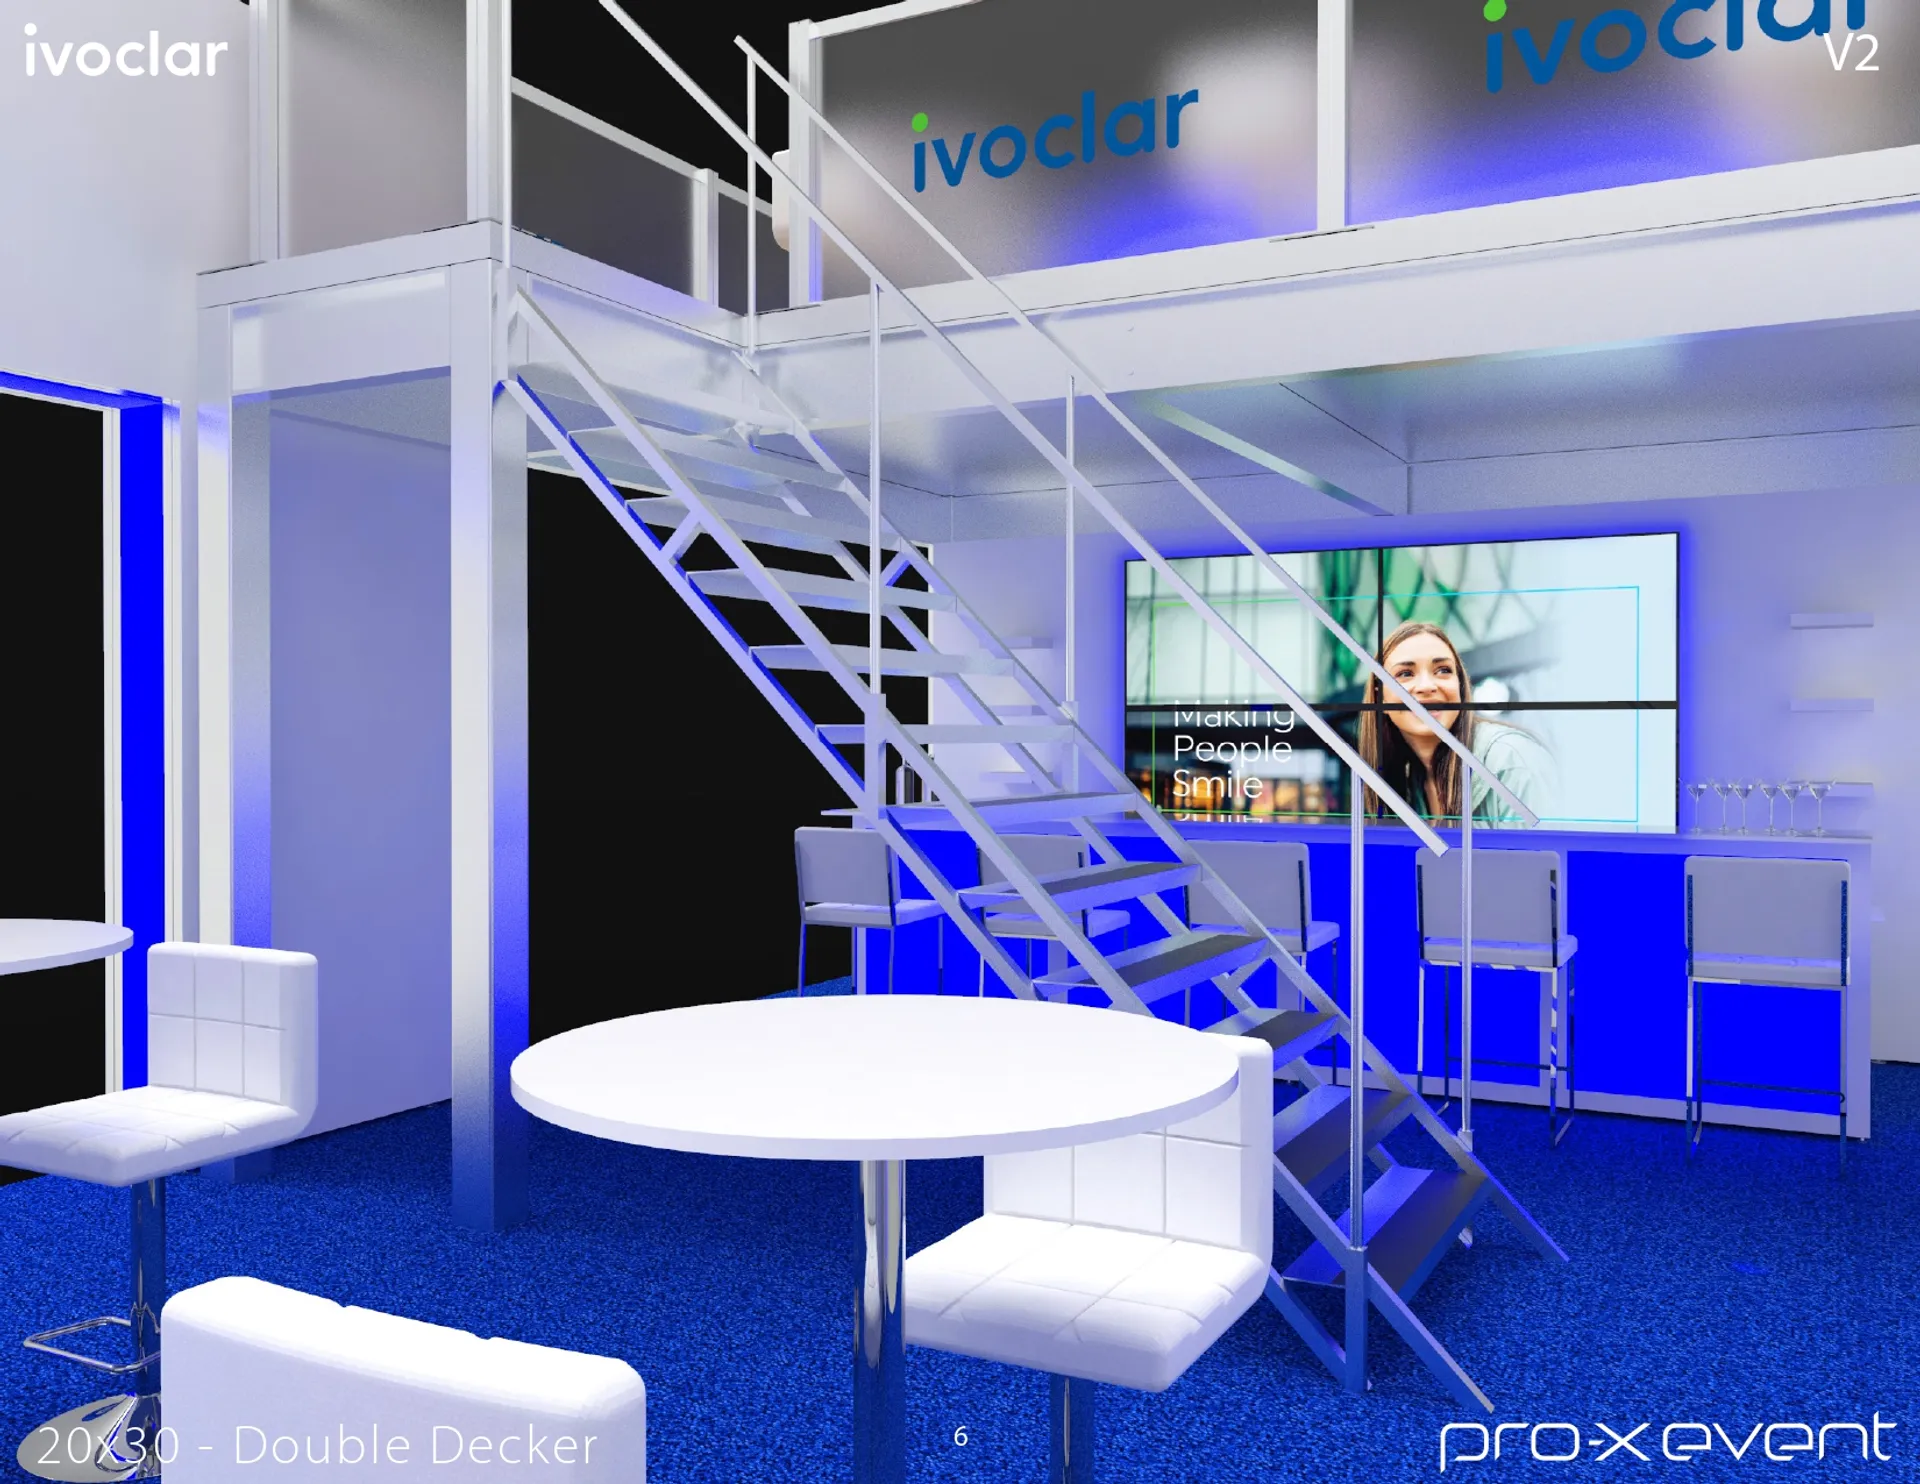 booth-design-projects/Pro-X Exhibits/2024-04-11-20x30-ISLAND-Project-55/IVOCLAR_20x30_DOUBLE DECKER_2022_V2-6_page-0001-qya81e.jpg